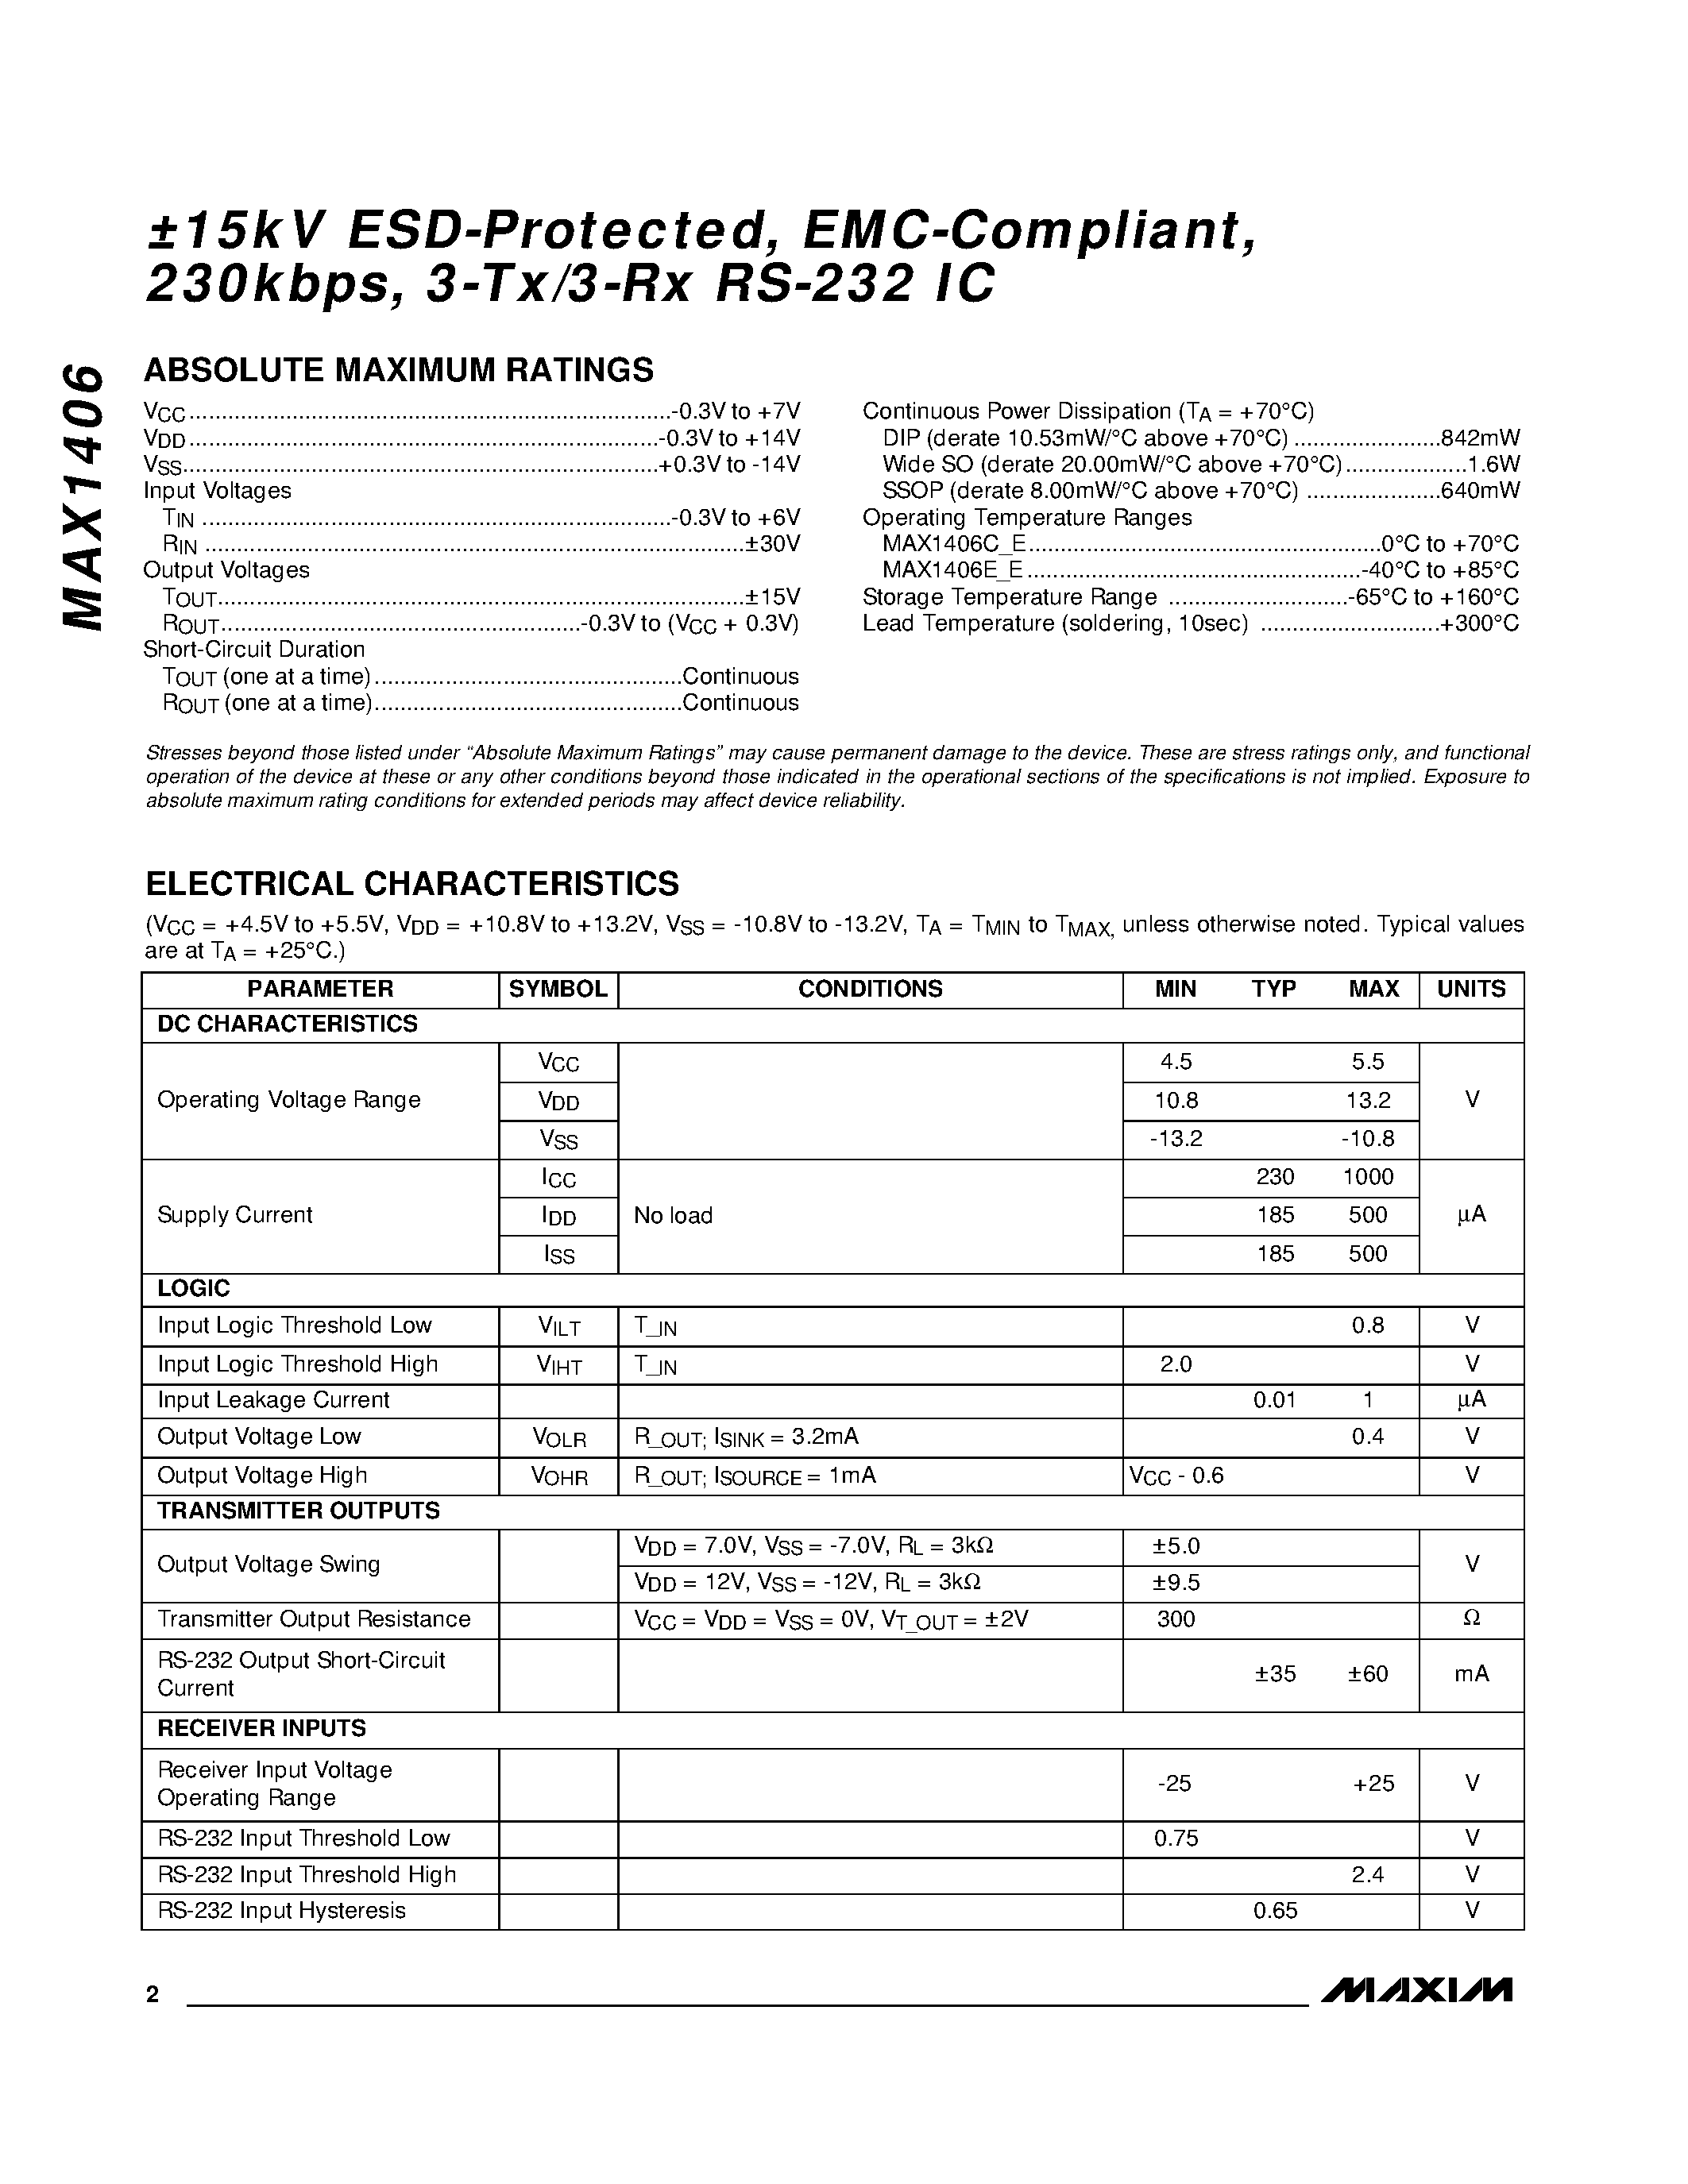 Datasheet MAX1406 - 15kV ESD-Protected / EMC-Compliant / 230kbps / 3-Tx/3-Rx RS-232 IC page 2